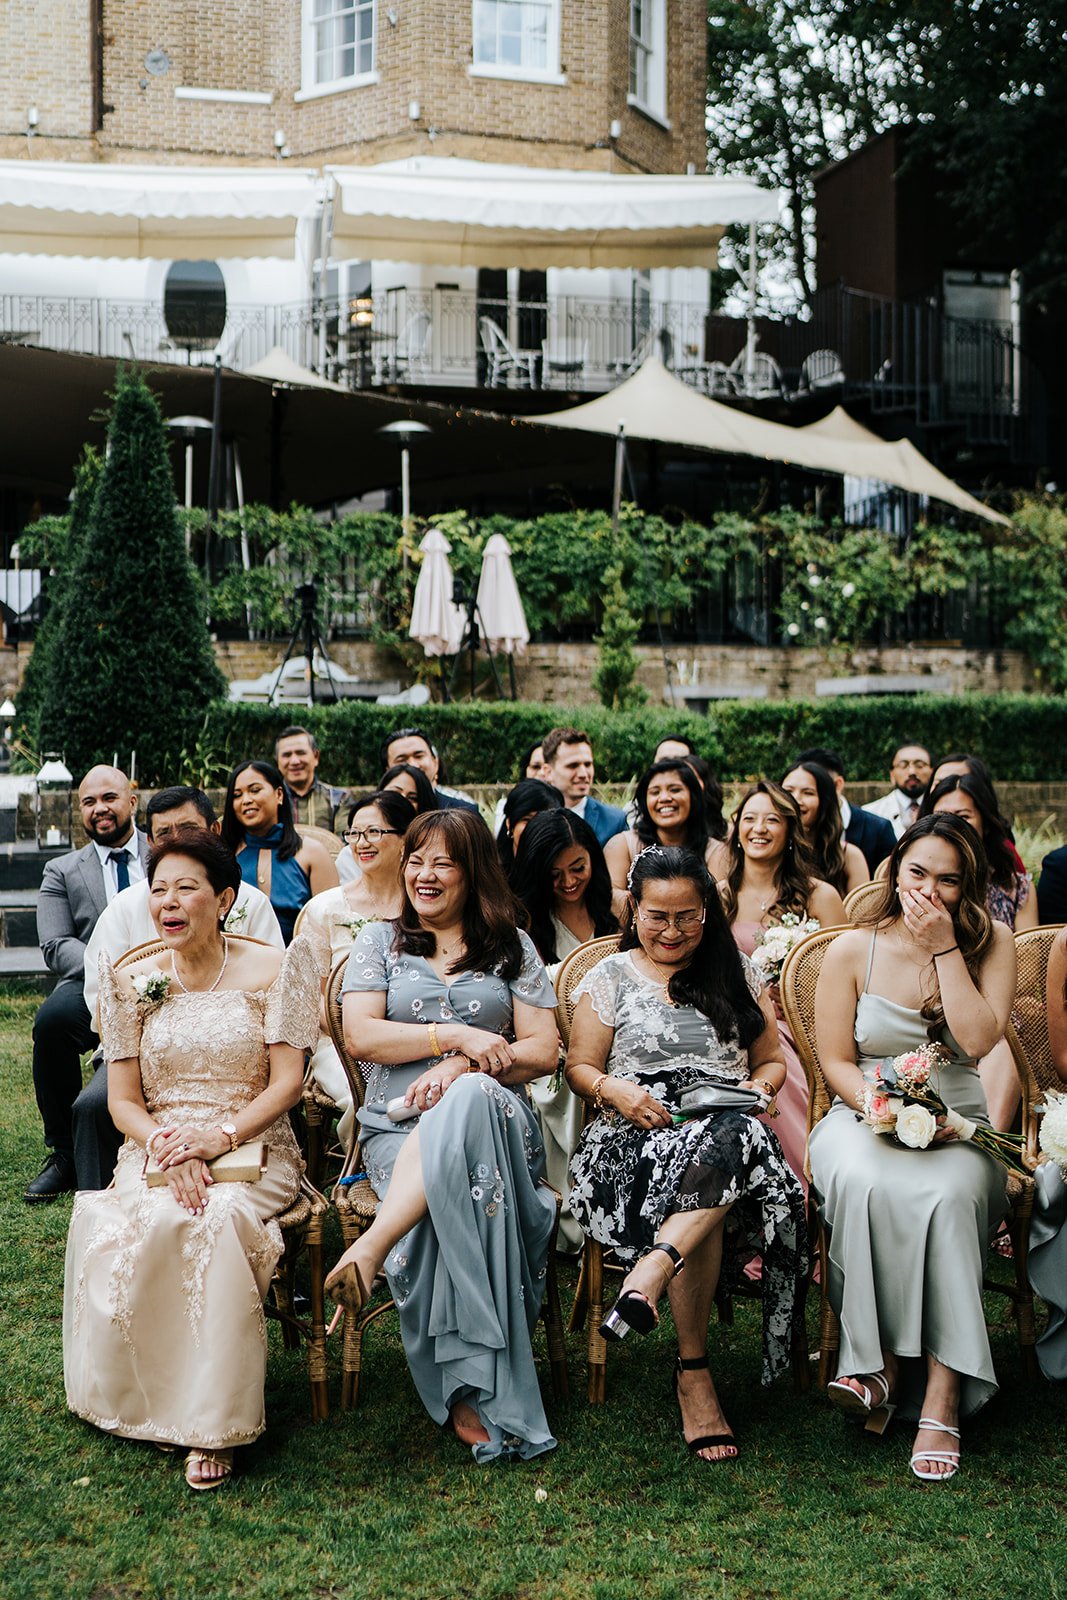 Candid photograph of guests listening to the bride and groom exchange vows at Bingham Riverhouse wedding